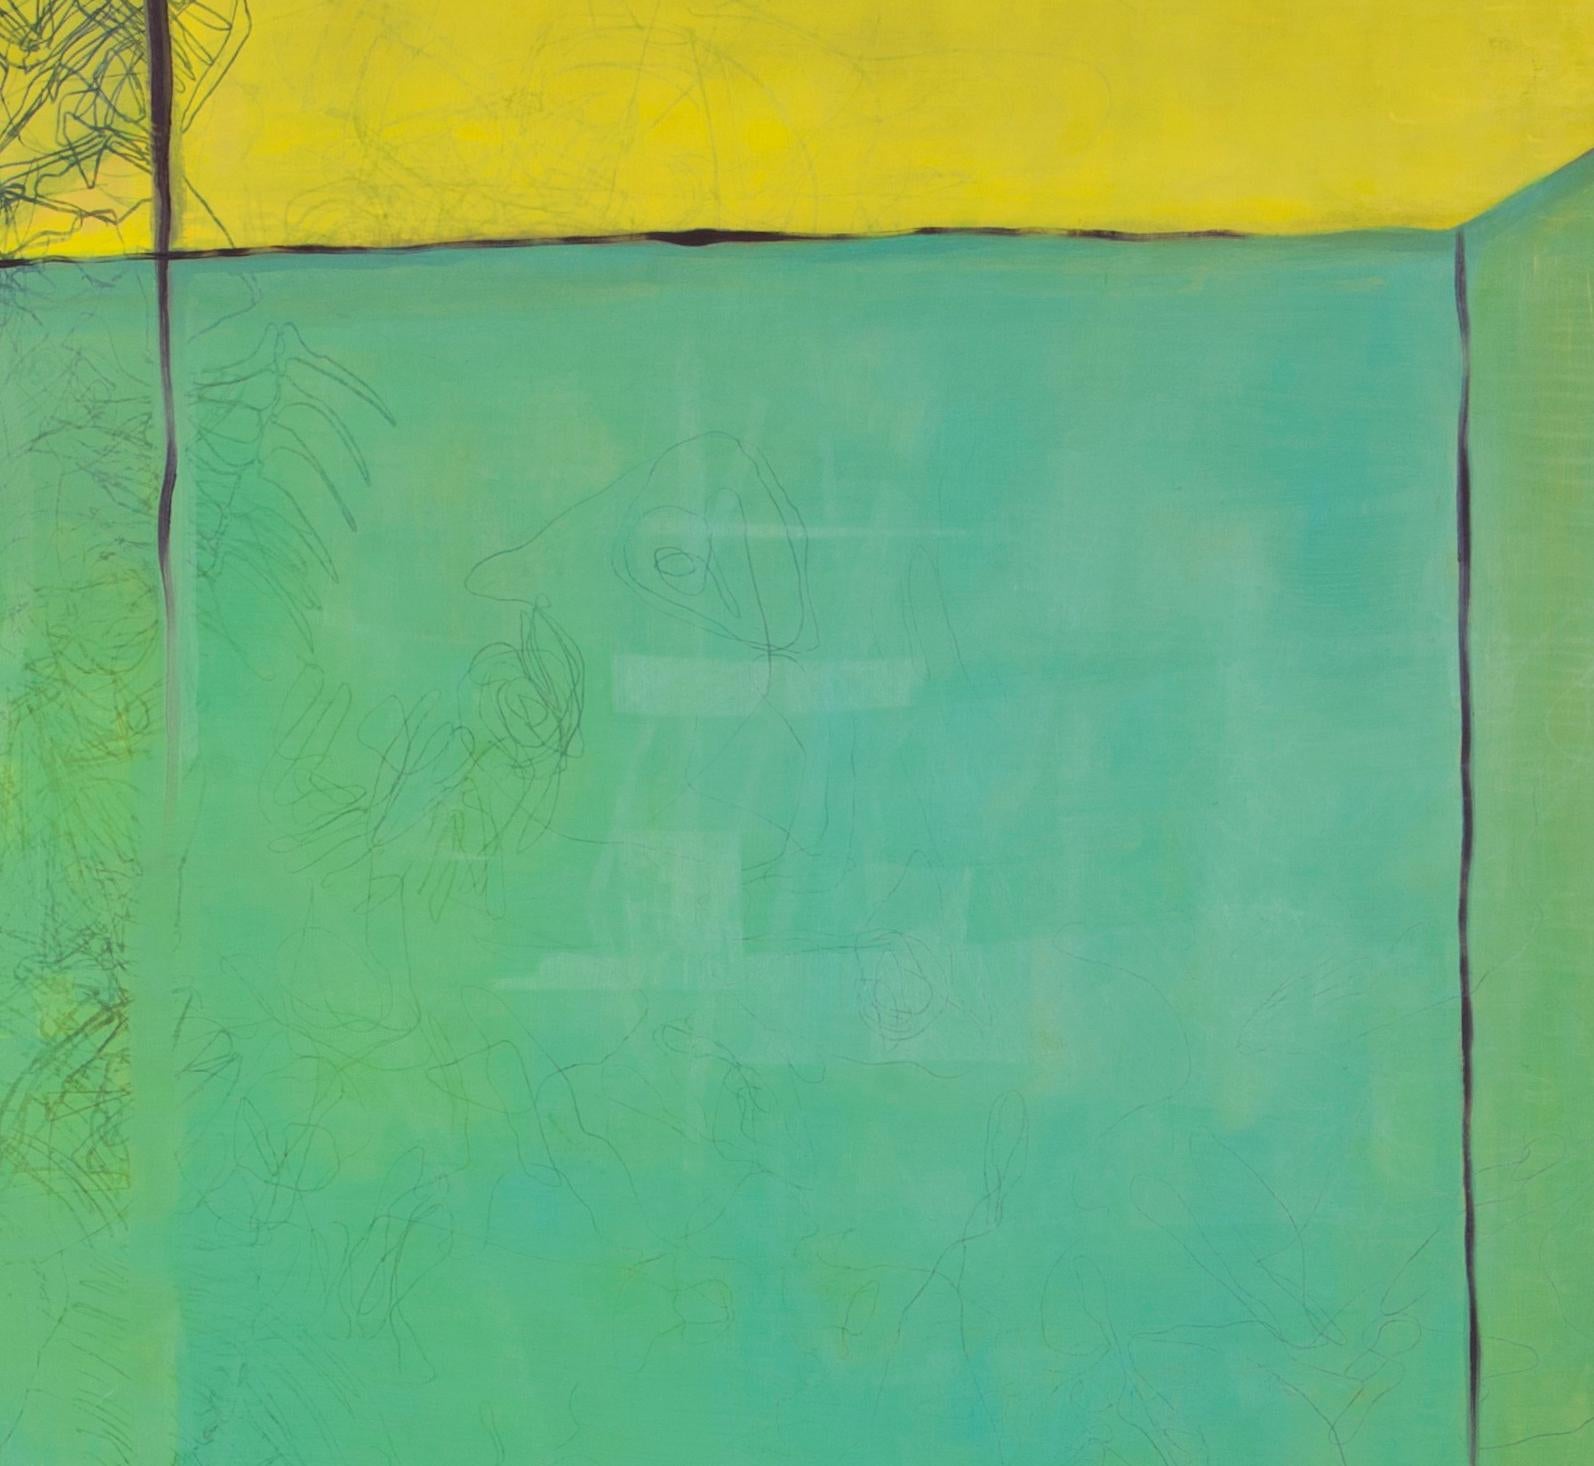 No Diving: large contemporary abstract painting in green, yellow &orange - Abstract Painting by Paula Cahill